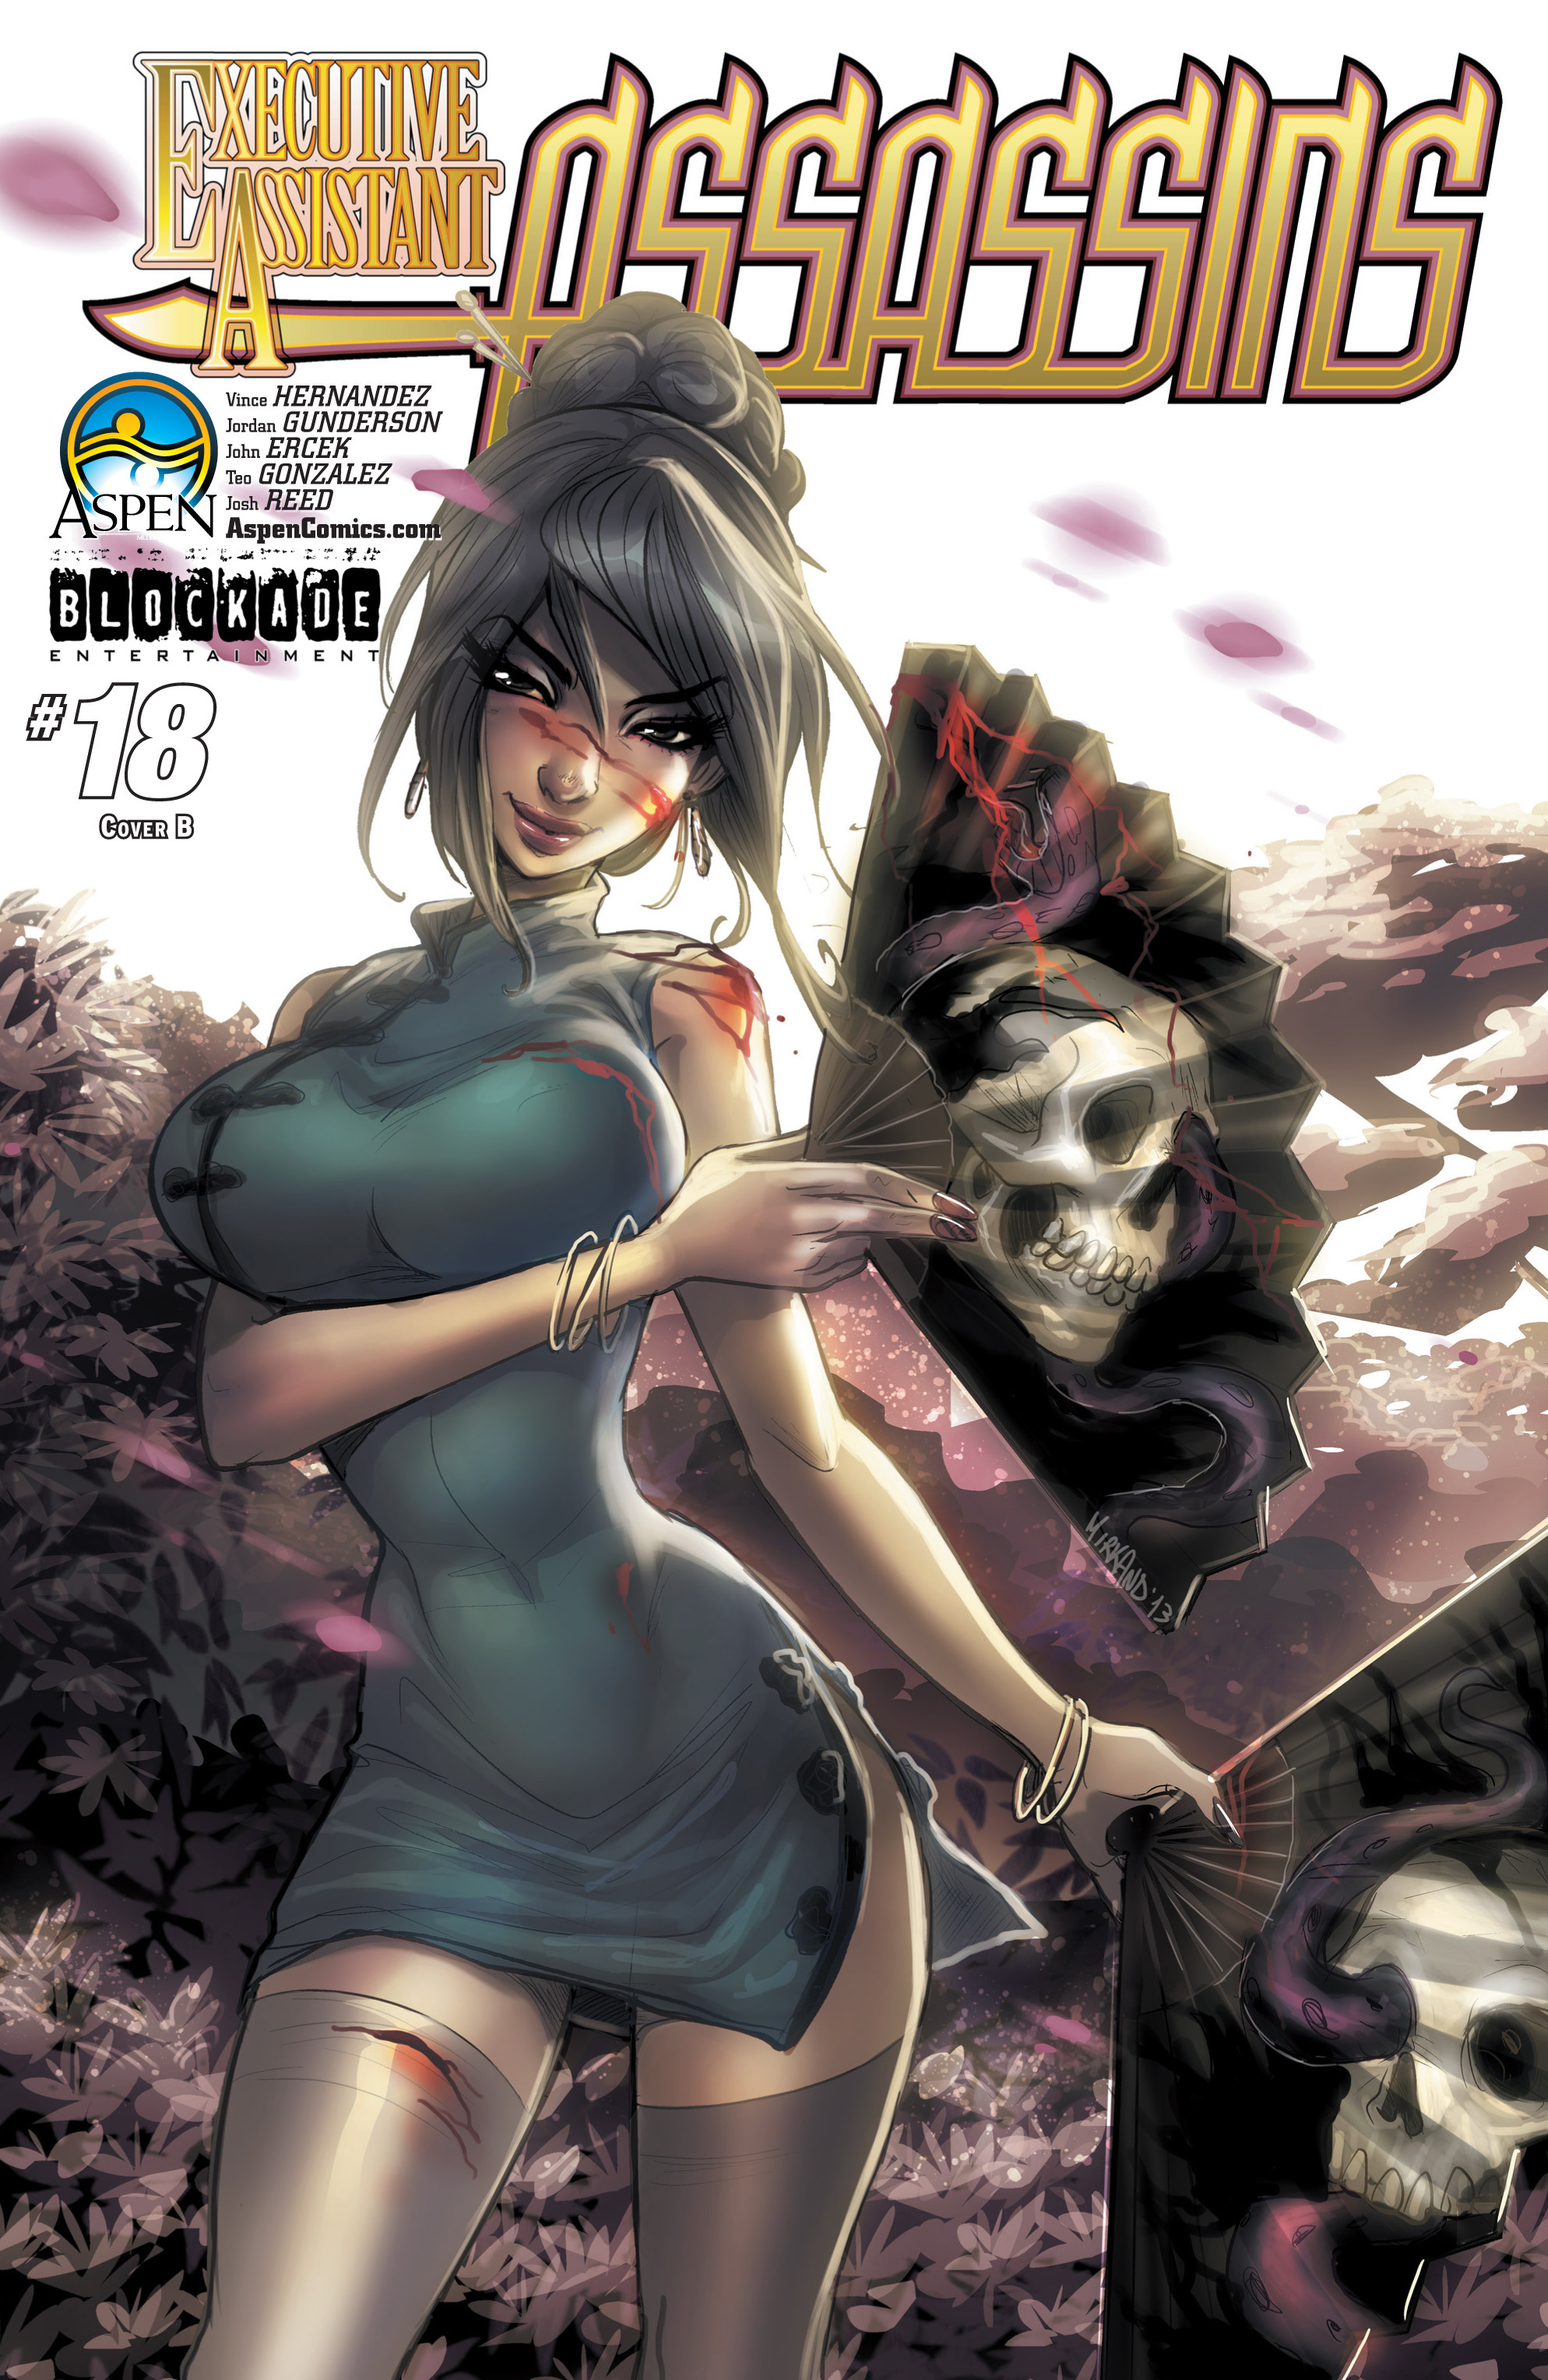 Read online Executive Assistant: Assassins comic -  Issue #18 - 2